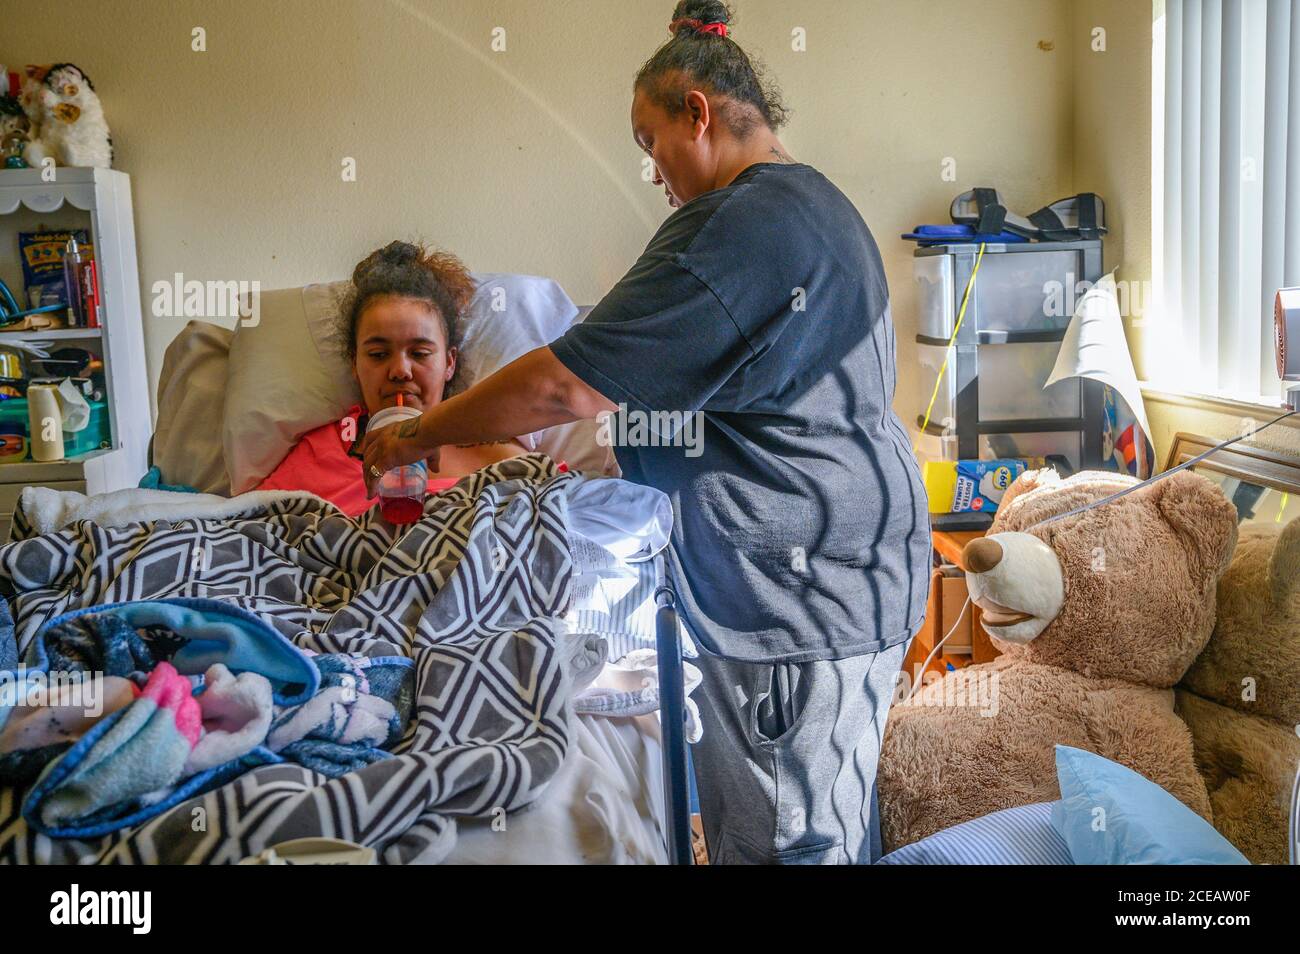 Sacramento, California, USA. 14th Feb, 2019. Felicia Clark, 36, gives her daughter Felicia Brent-Velasquez, 18, a drink of soda in Sacramento on Friday, Feb. 14, 2020. She said that doctors said she would never eat or drink or be off oxygen but since returning home she has defied all those odds. Brent-Velasquez said she is proud she was able to remove her catheter and under her mother's care doesn't have bedsores anymore. Credit: Renée C. Byer/ZUMA Wire/Alamy Live News Stock Photo